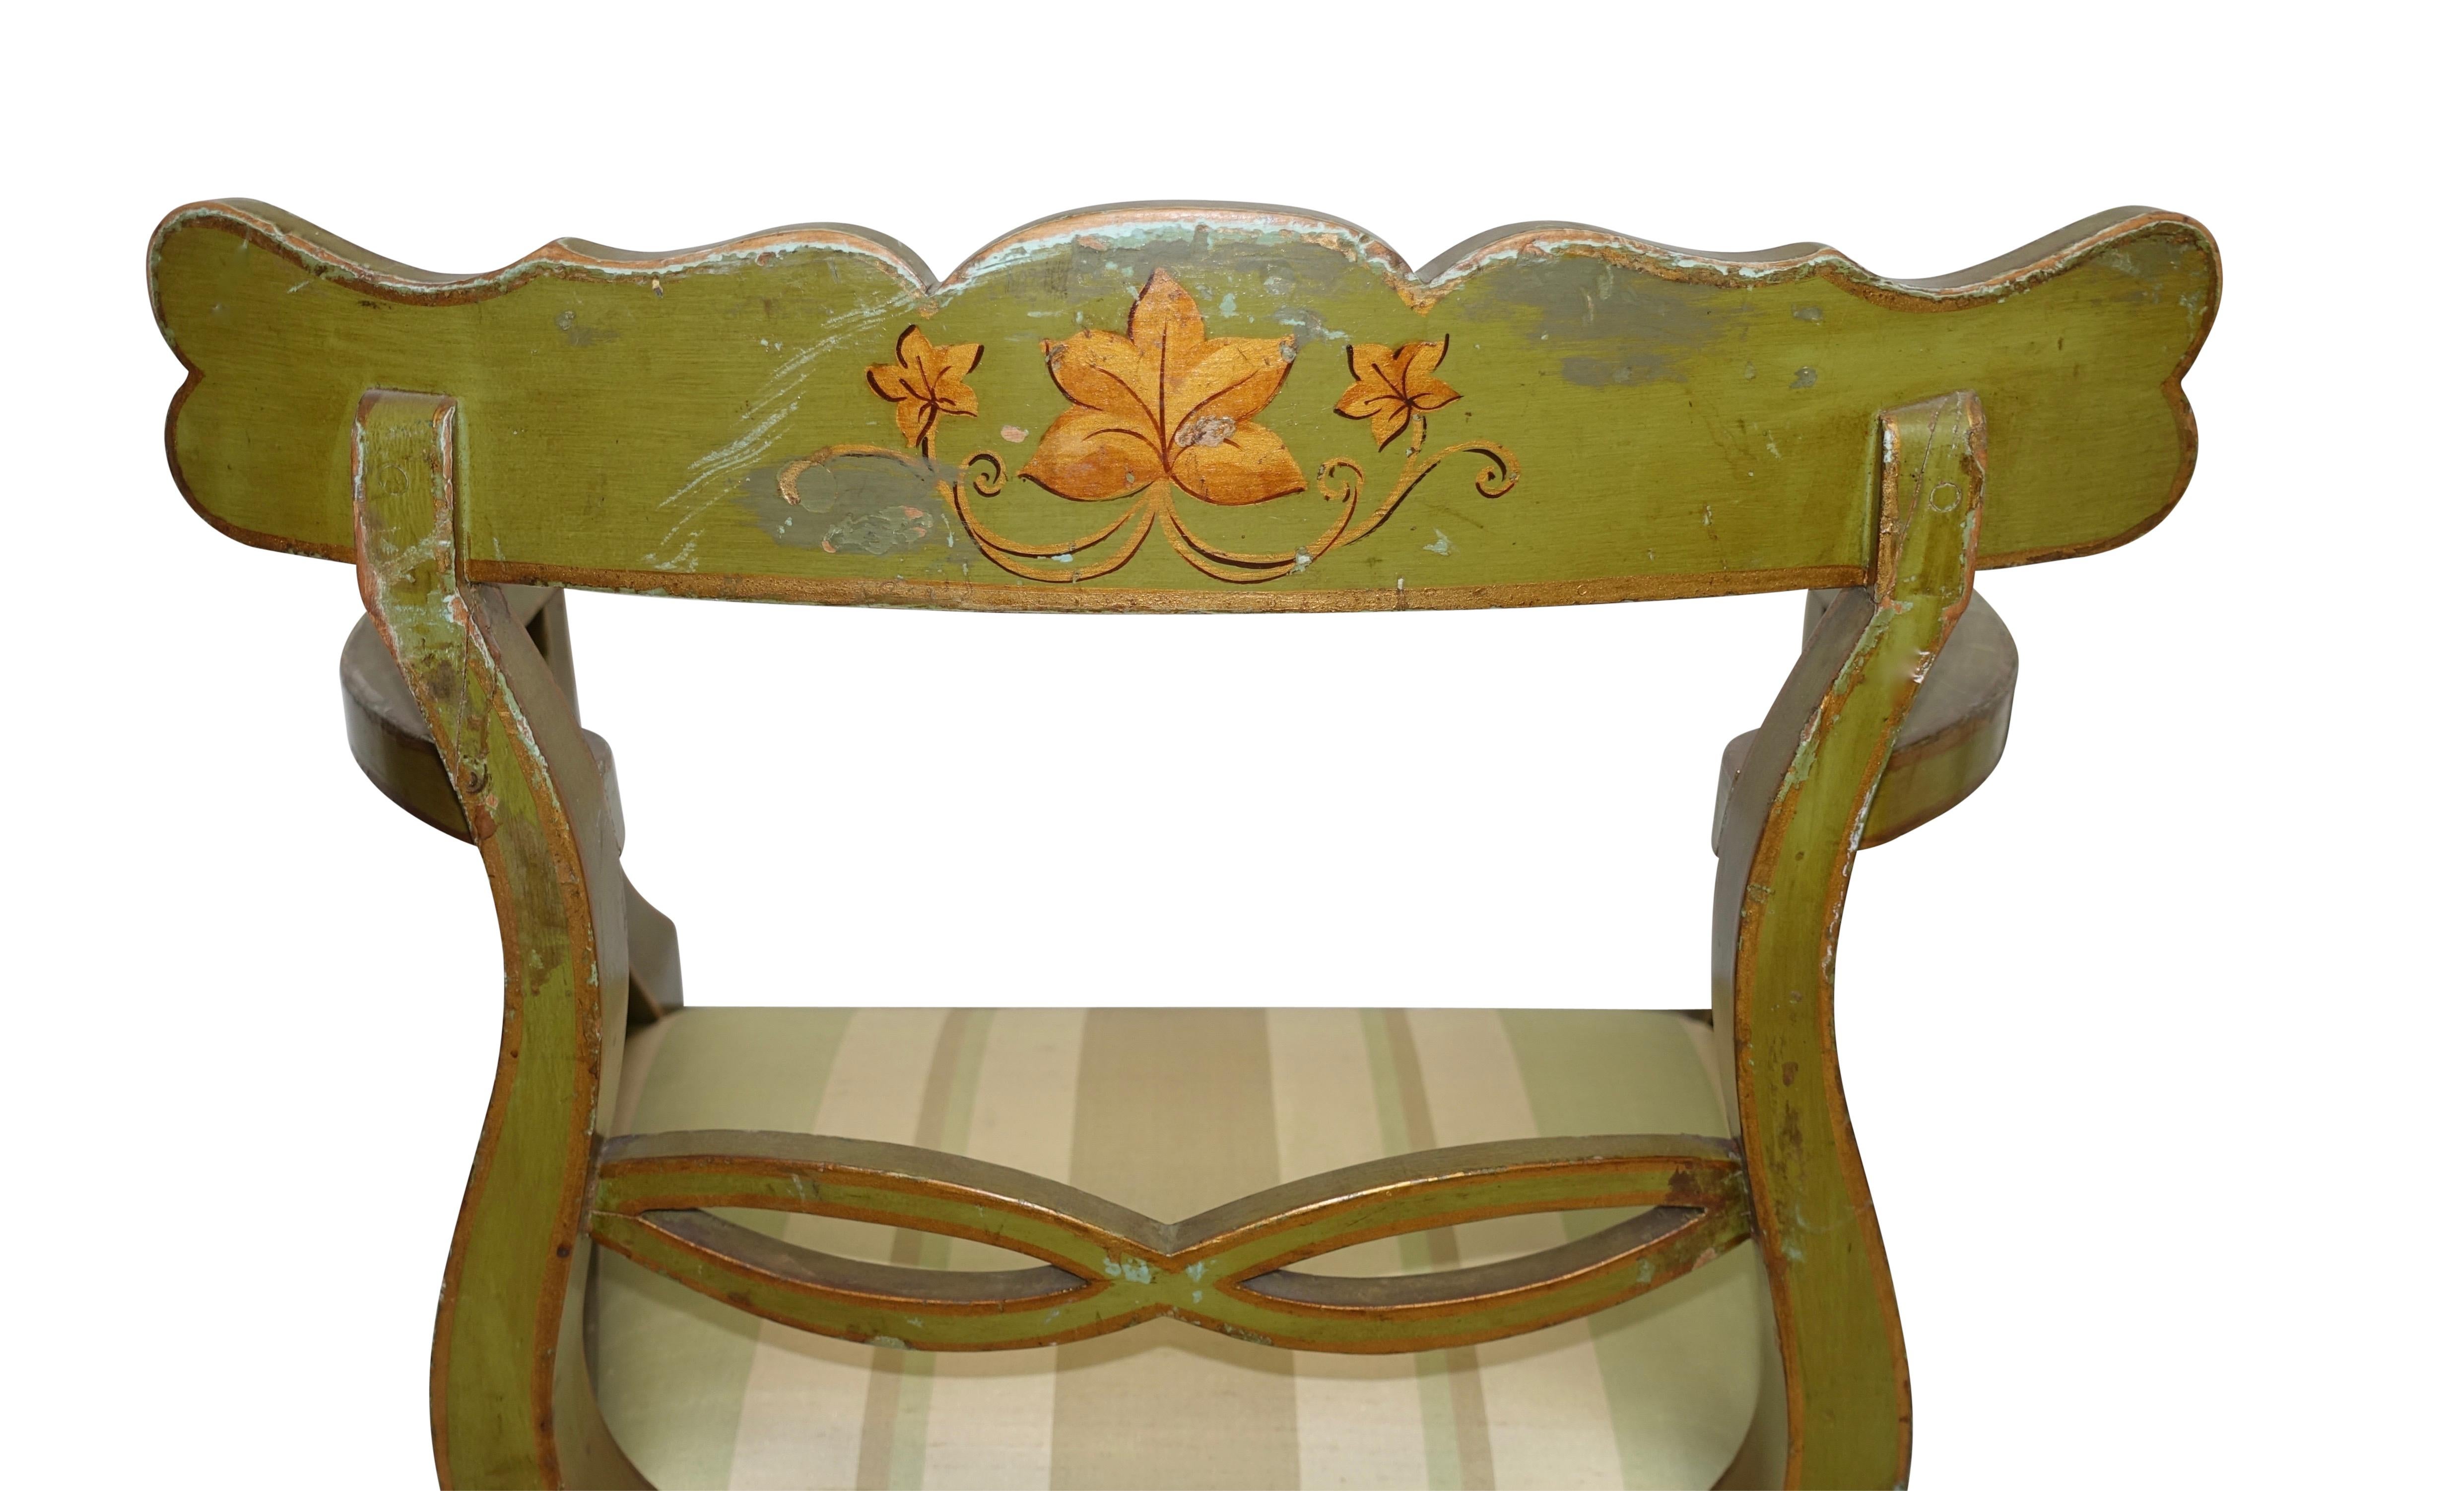 Four Green Painted Armchairs with Trailing Ivy, Northern European, 19th Century For Sale 3